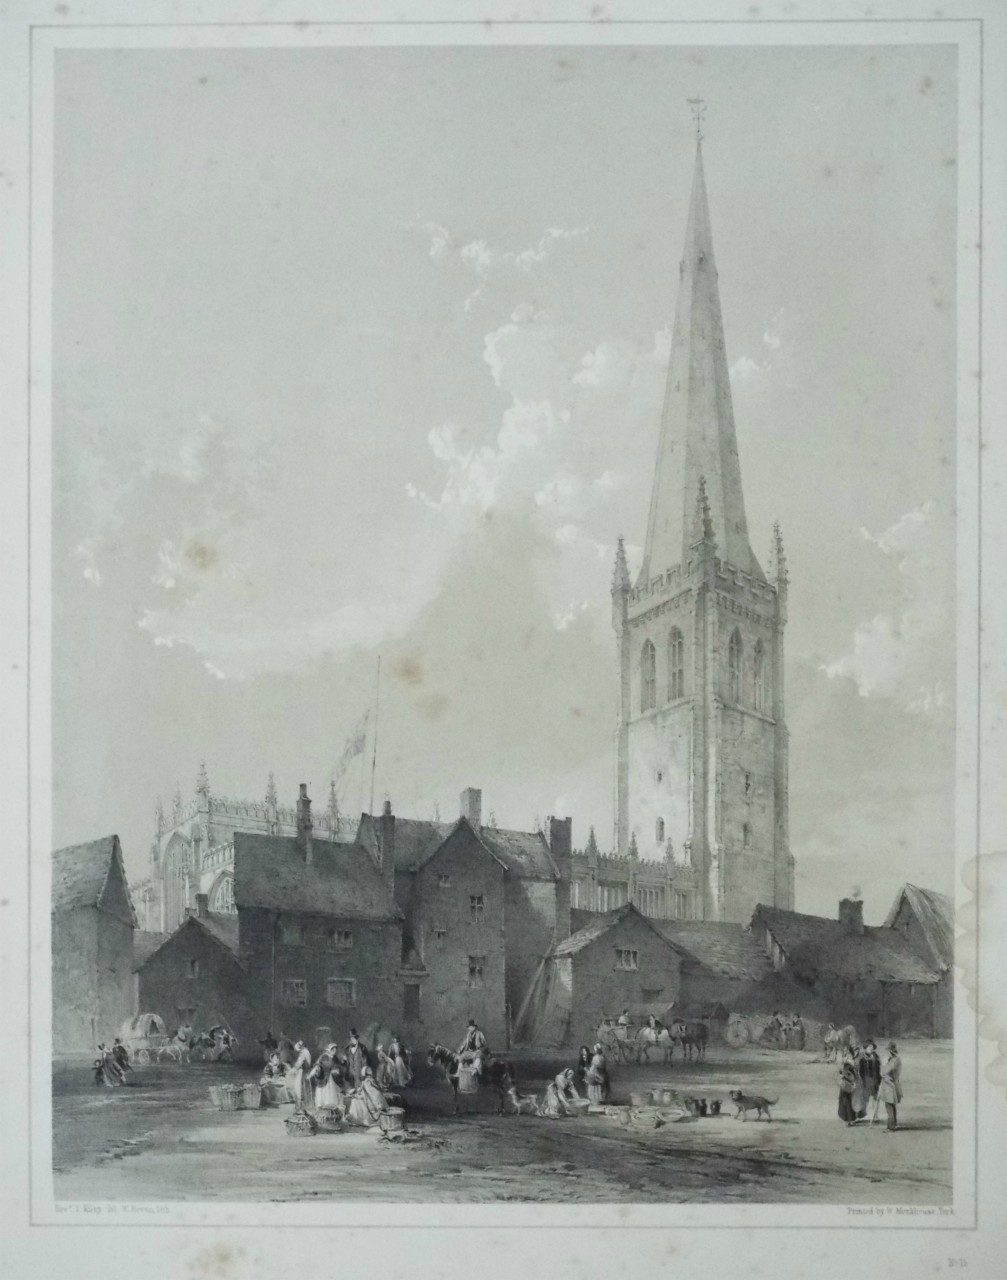 Lithograph - (Wakefield - North-East View of the Church from the Borough Market) - Bevan